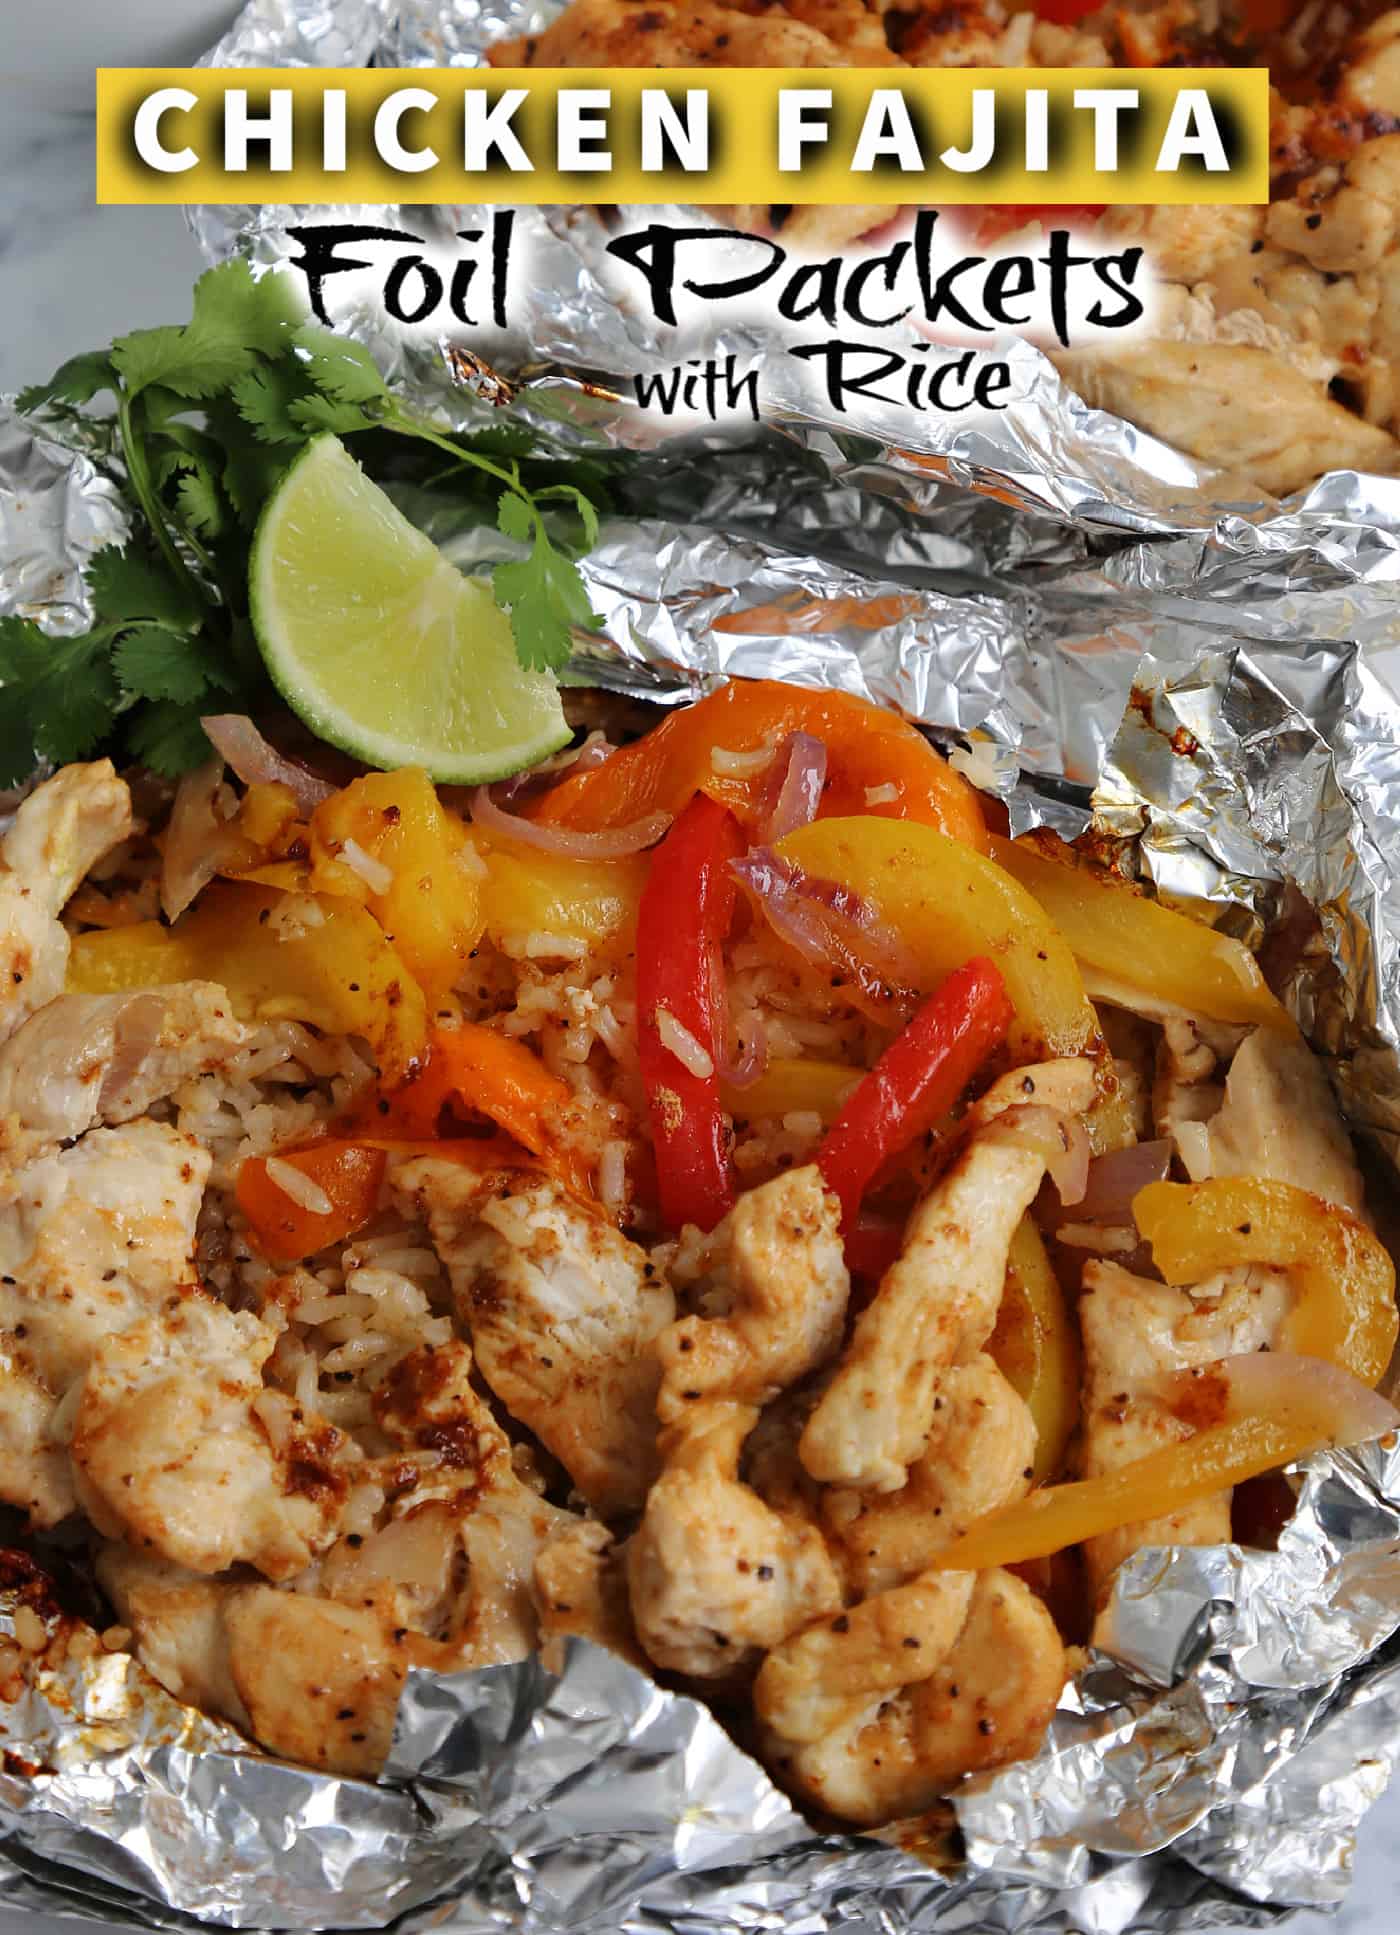 Chicken Fajita Foil Packs cooked on the grill with text